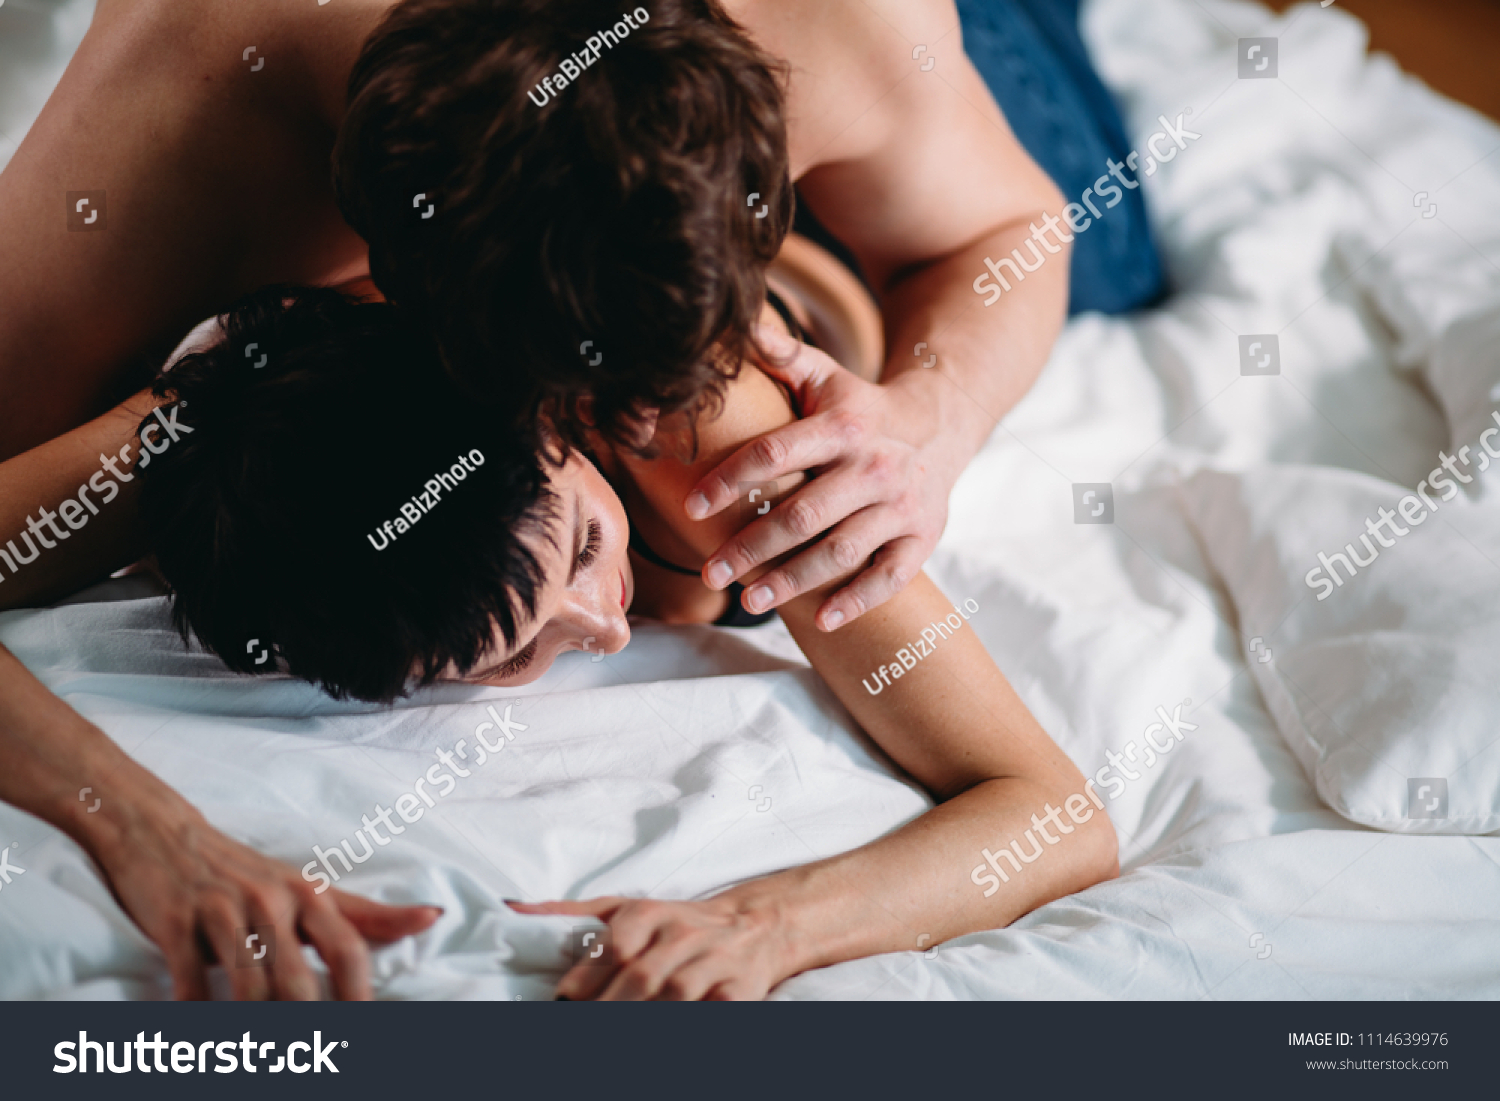 husband and wife sexing